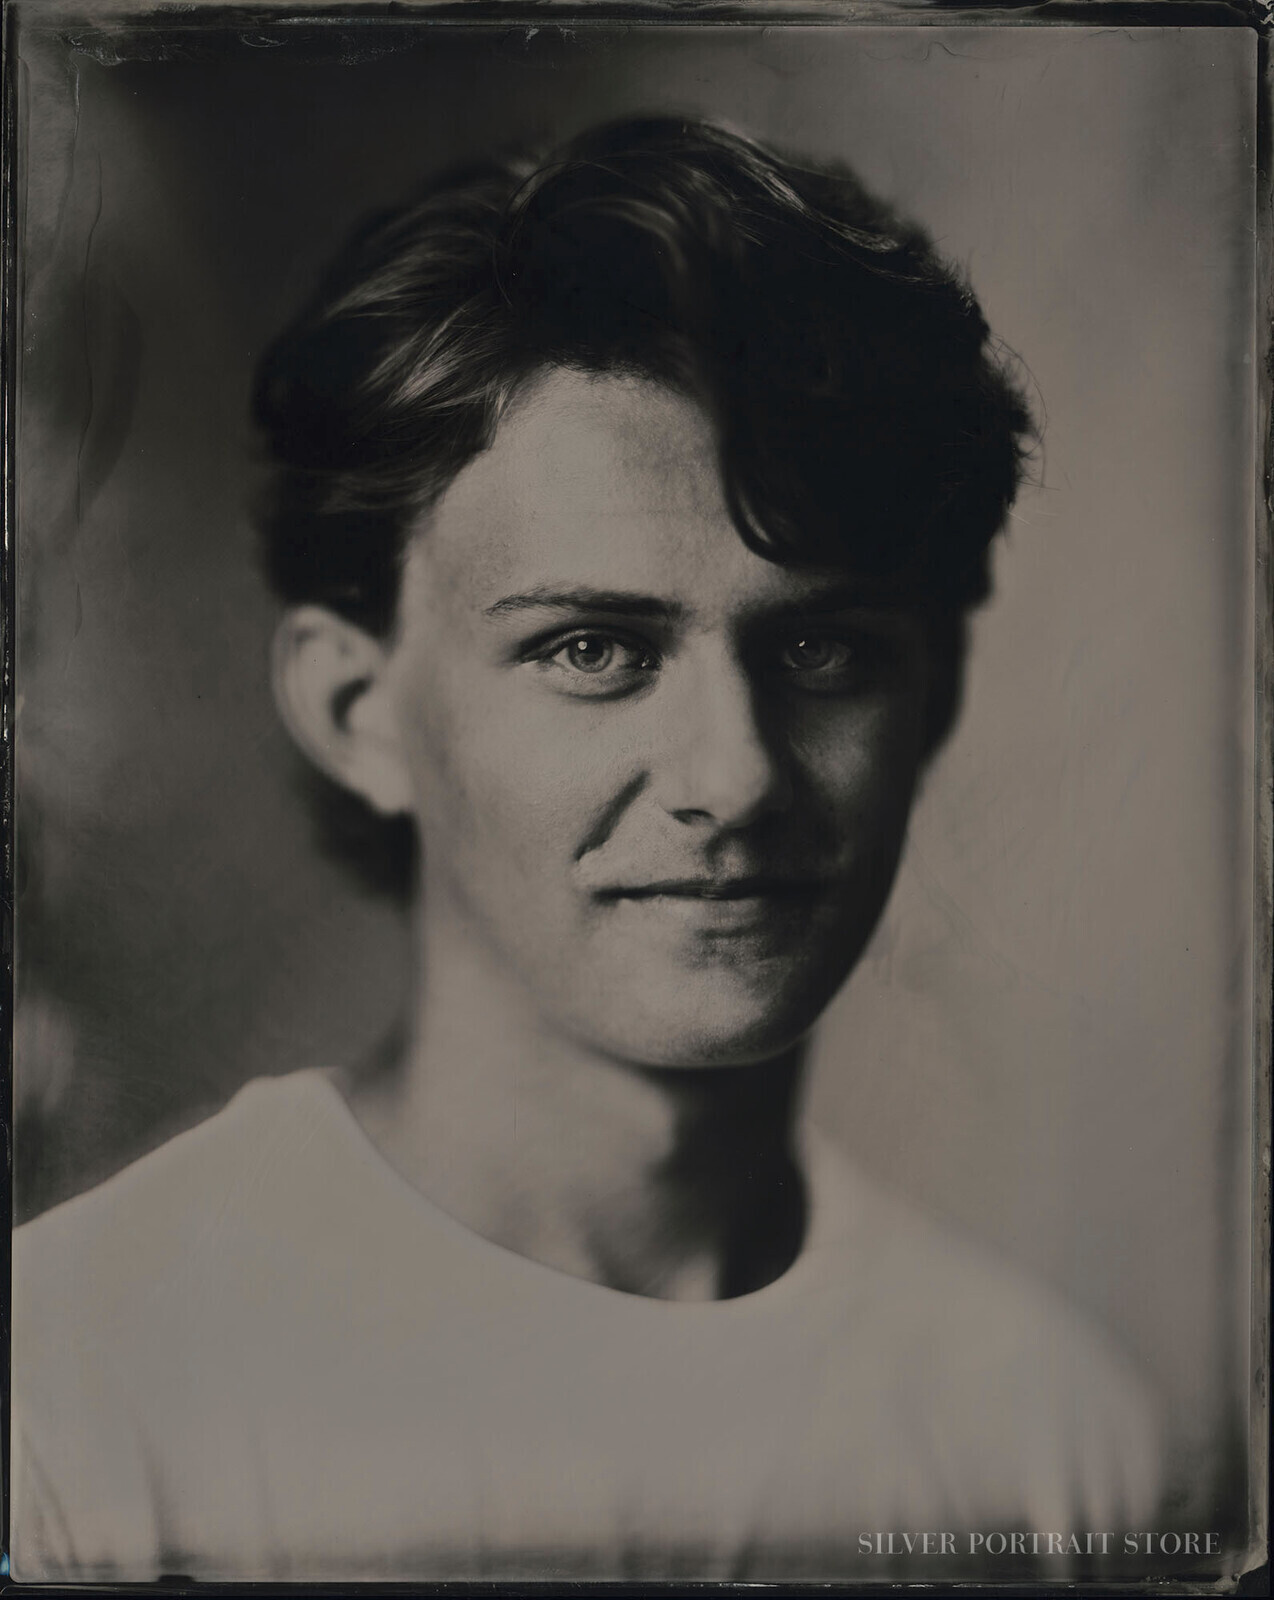 Max-Silver Portrait Store-Wet plate collodion-Tintype 20 x 25 cm.